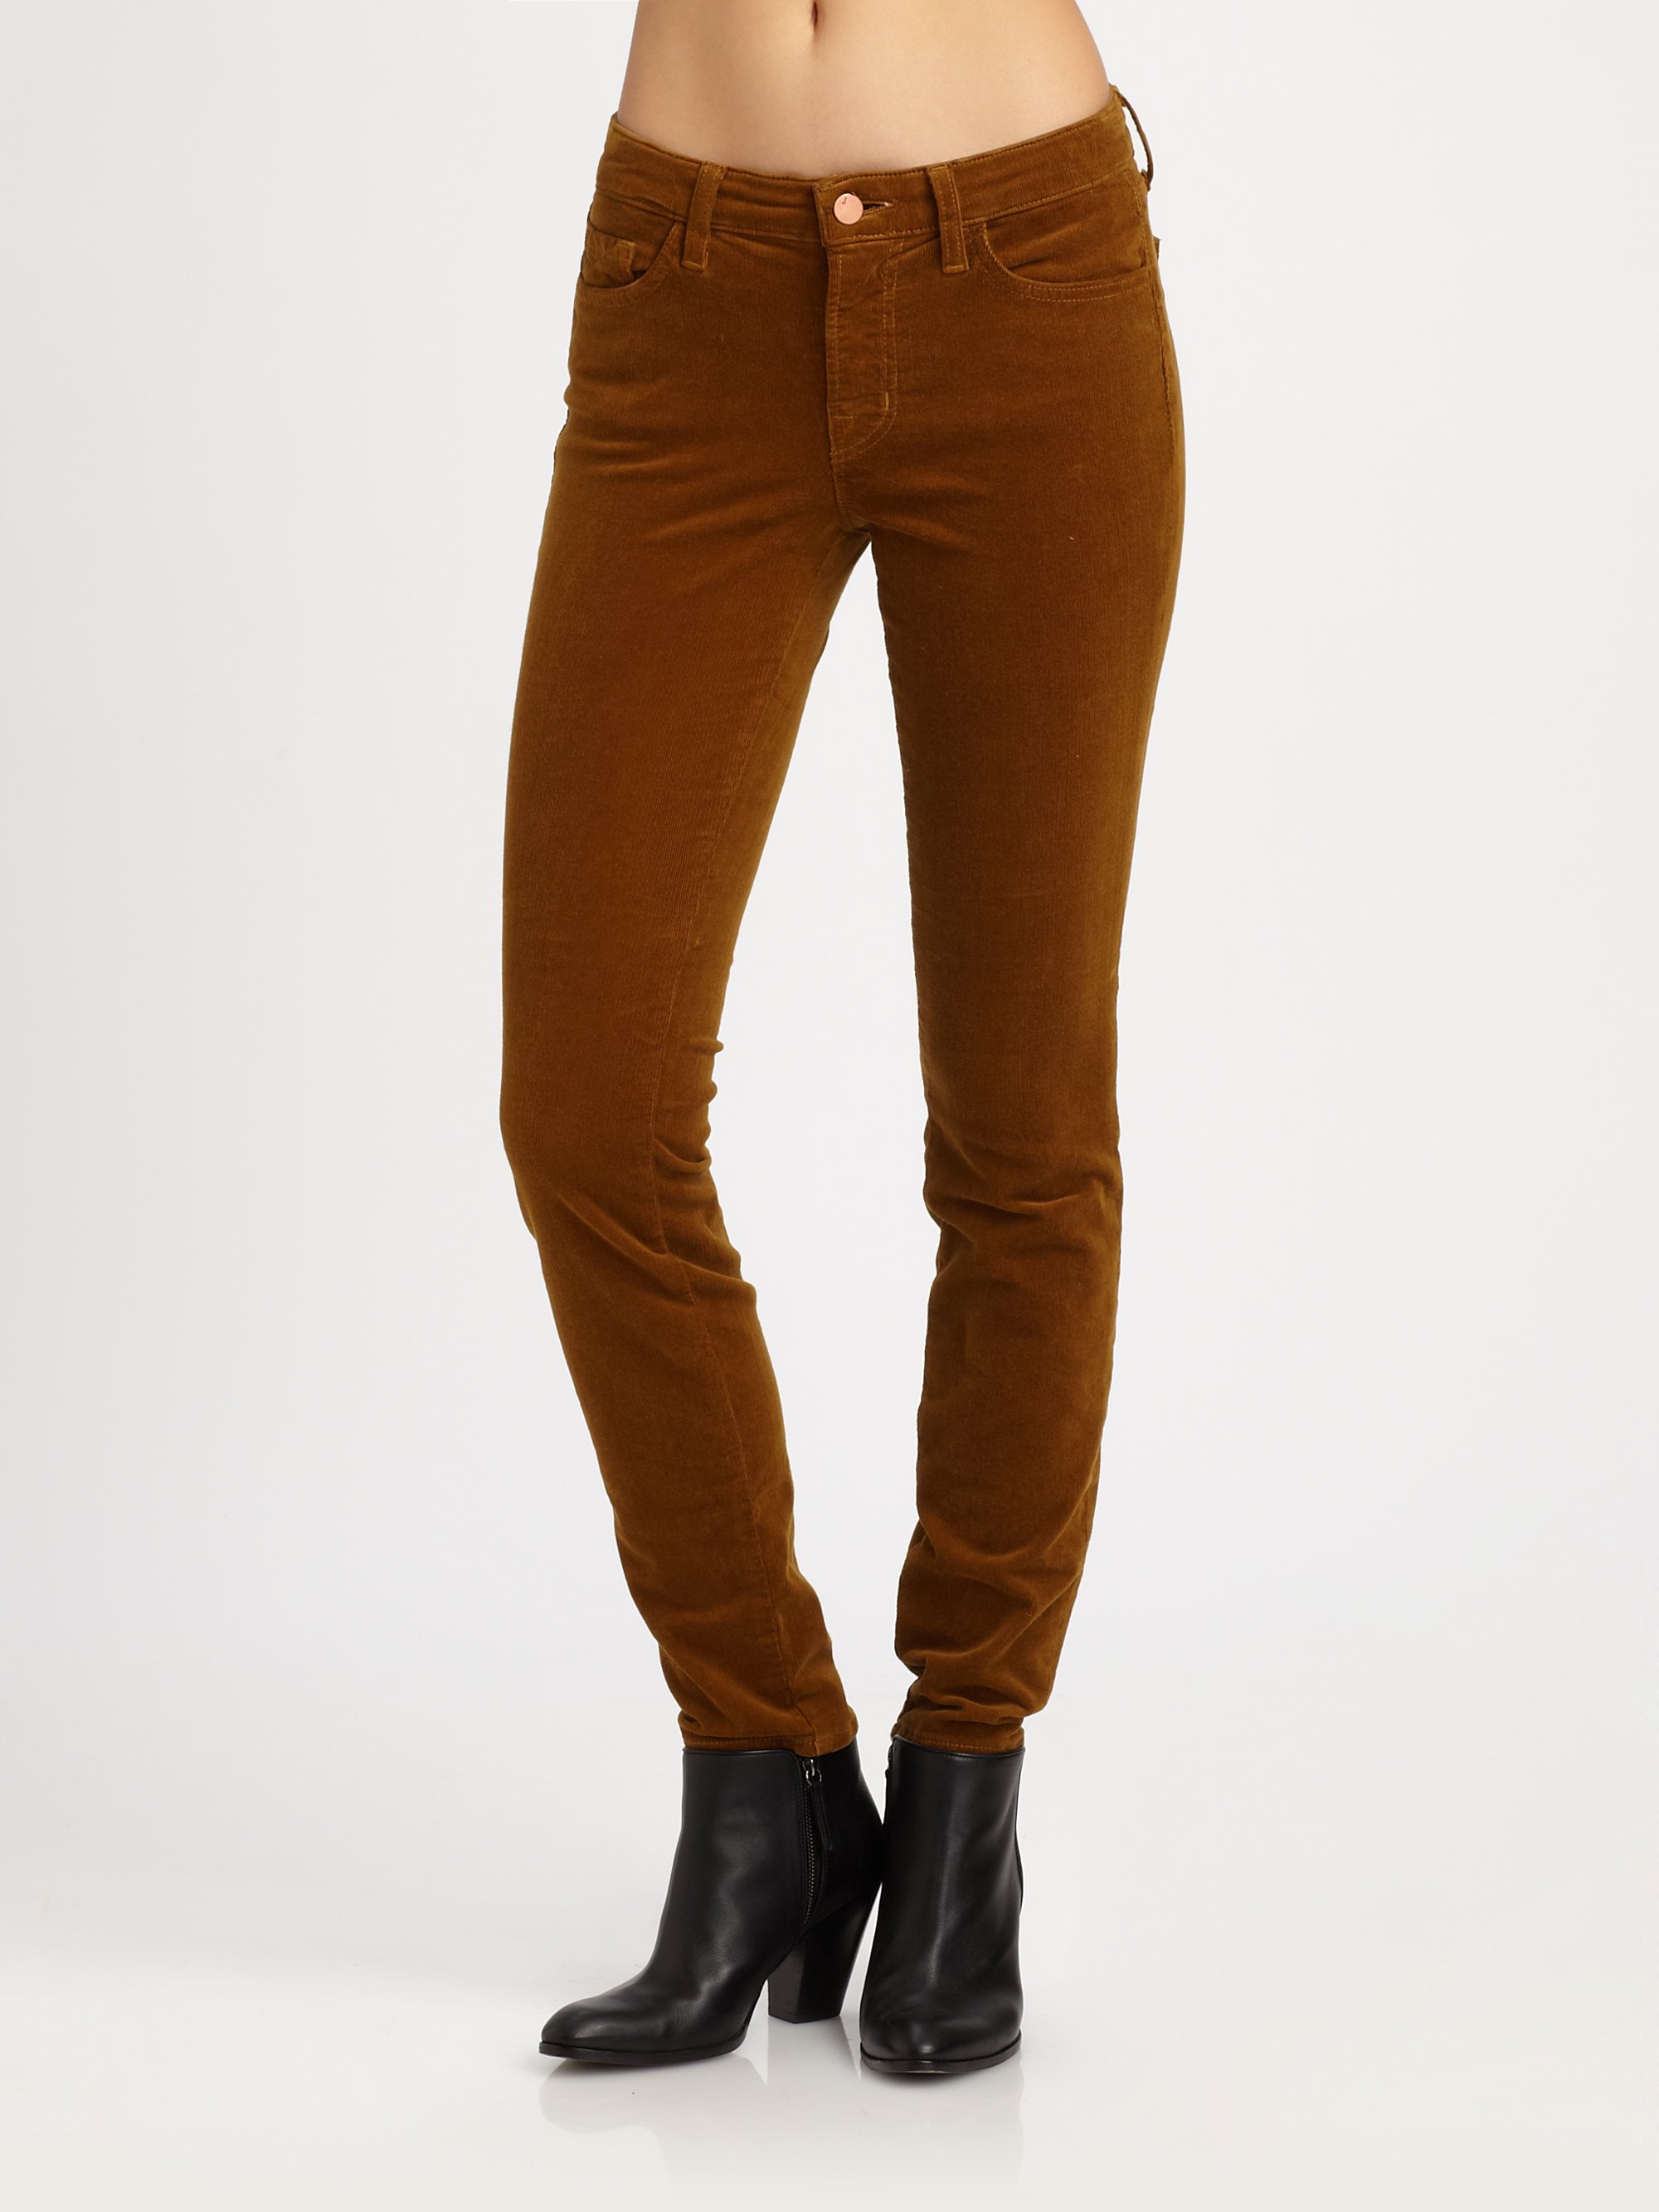 Brown Skinny Jeans | Jeans To